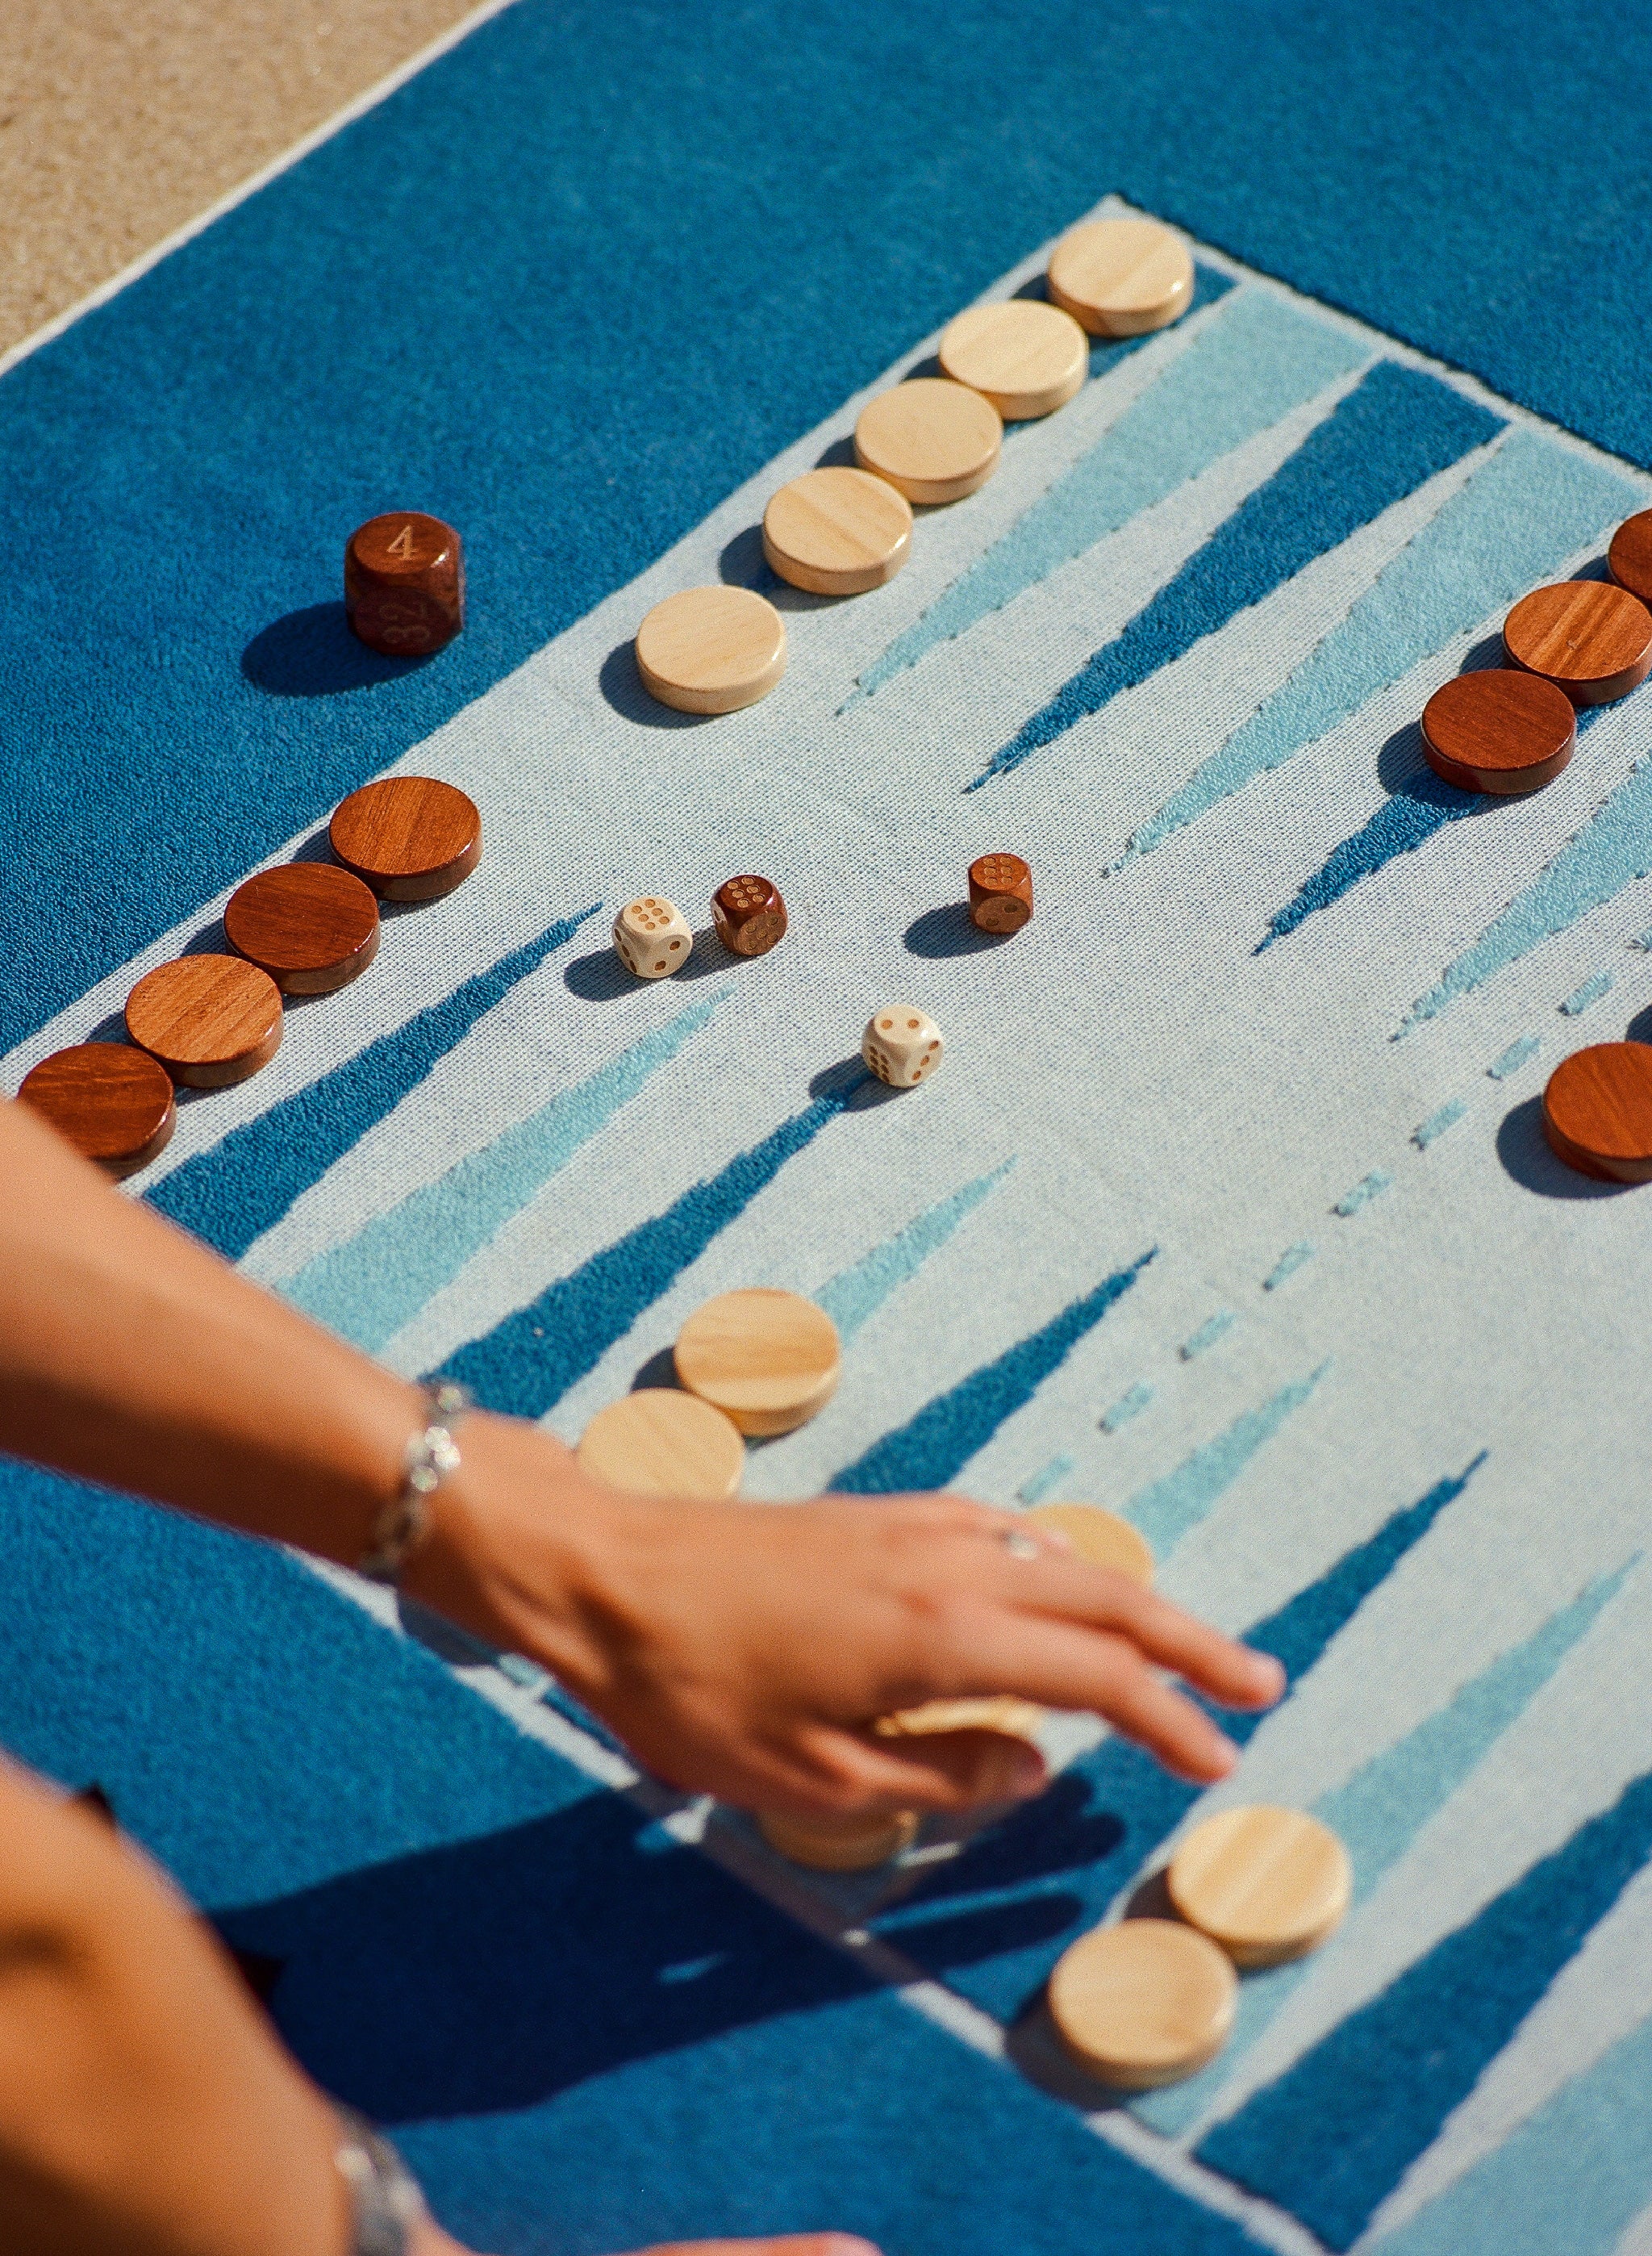 Close up of the beach board, a premium terry towel with backgammon woven into it